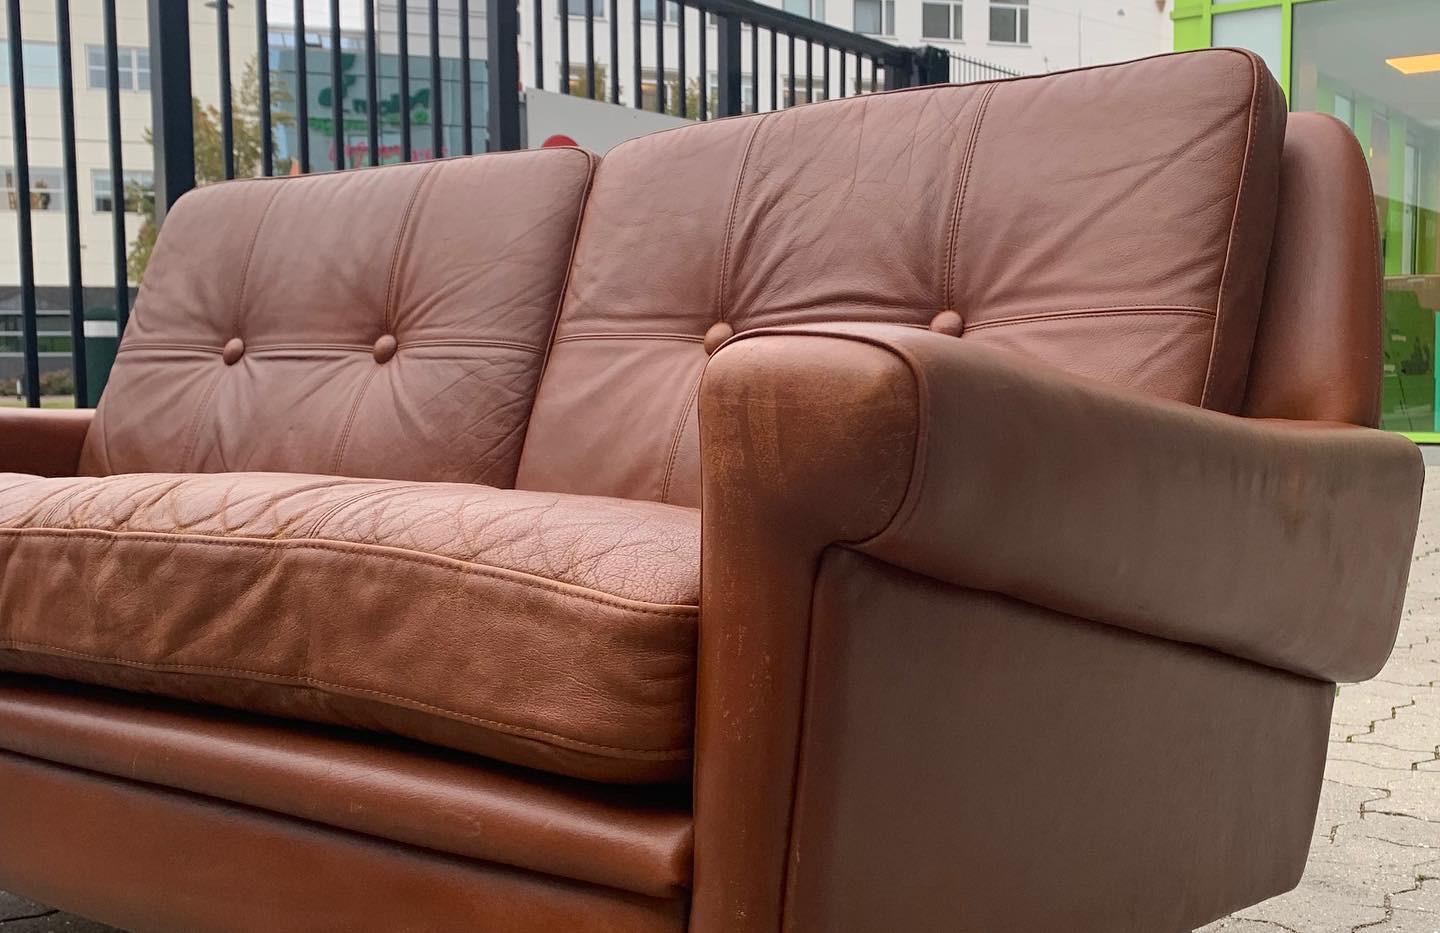 Svend Skipper Lounge Sofa by Skippers Furniture Denmark 1960s, tapered legs and cognac colored leather, rare model, very good vintage condition.